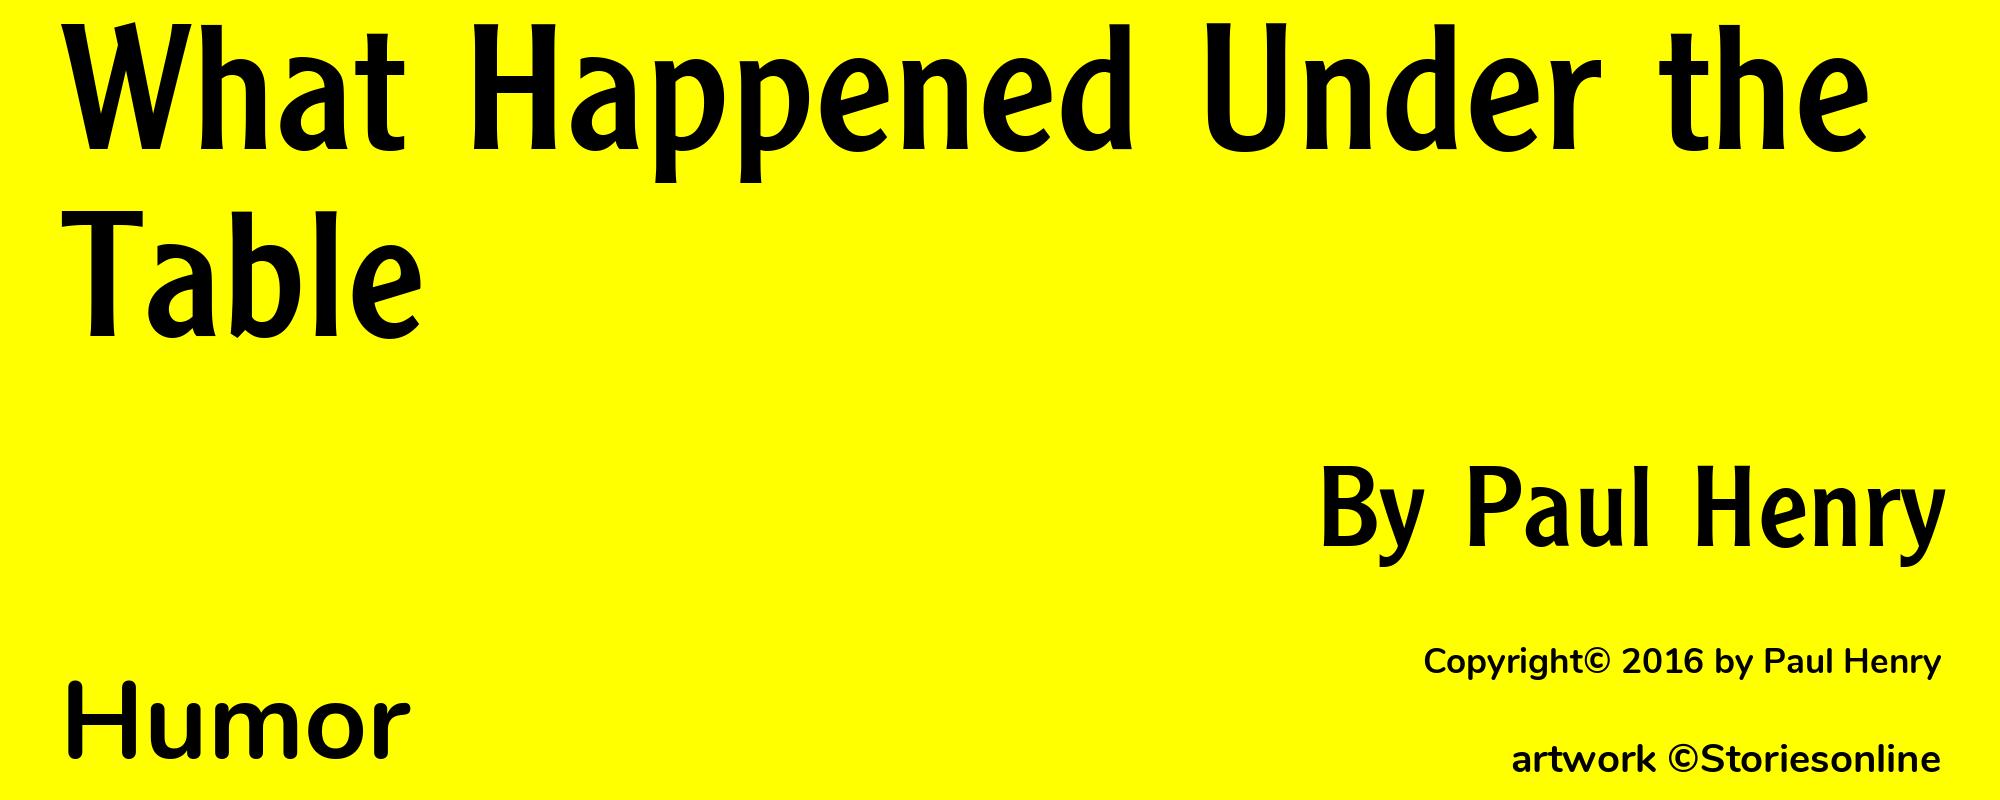 What Happened Under the Table - Cover